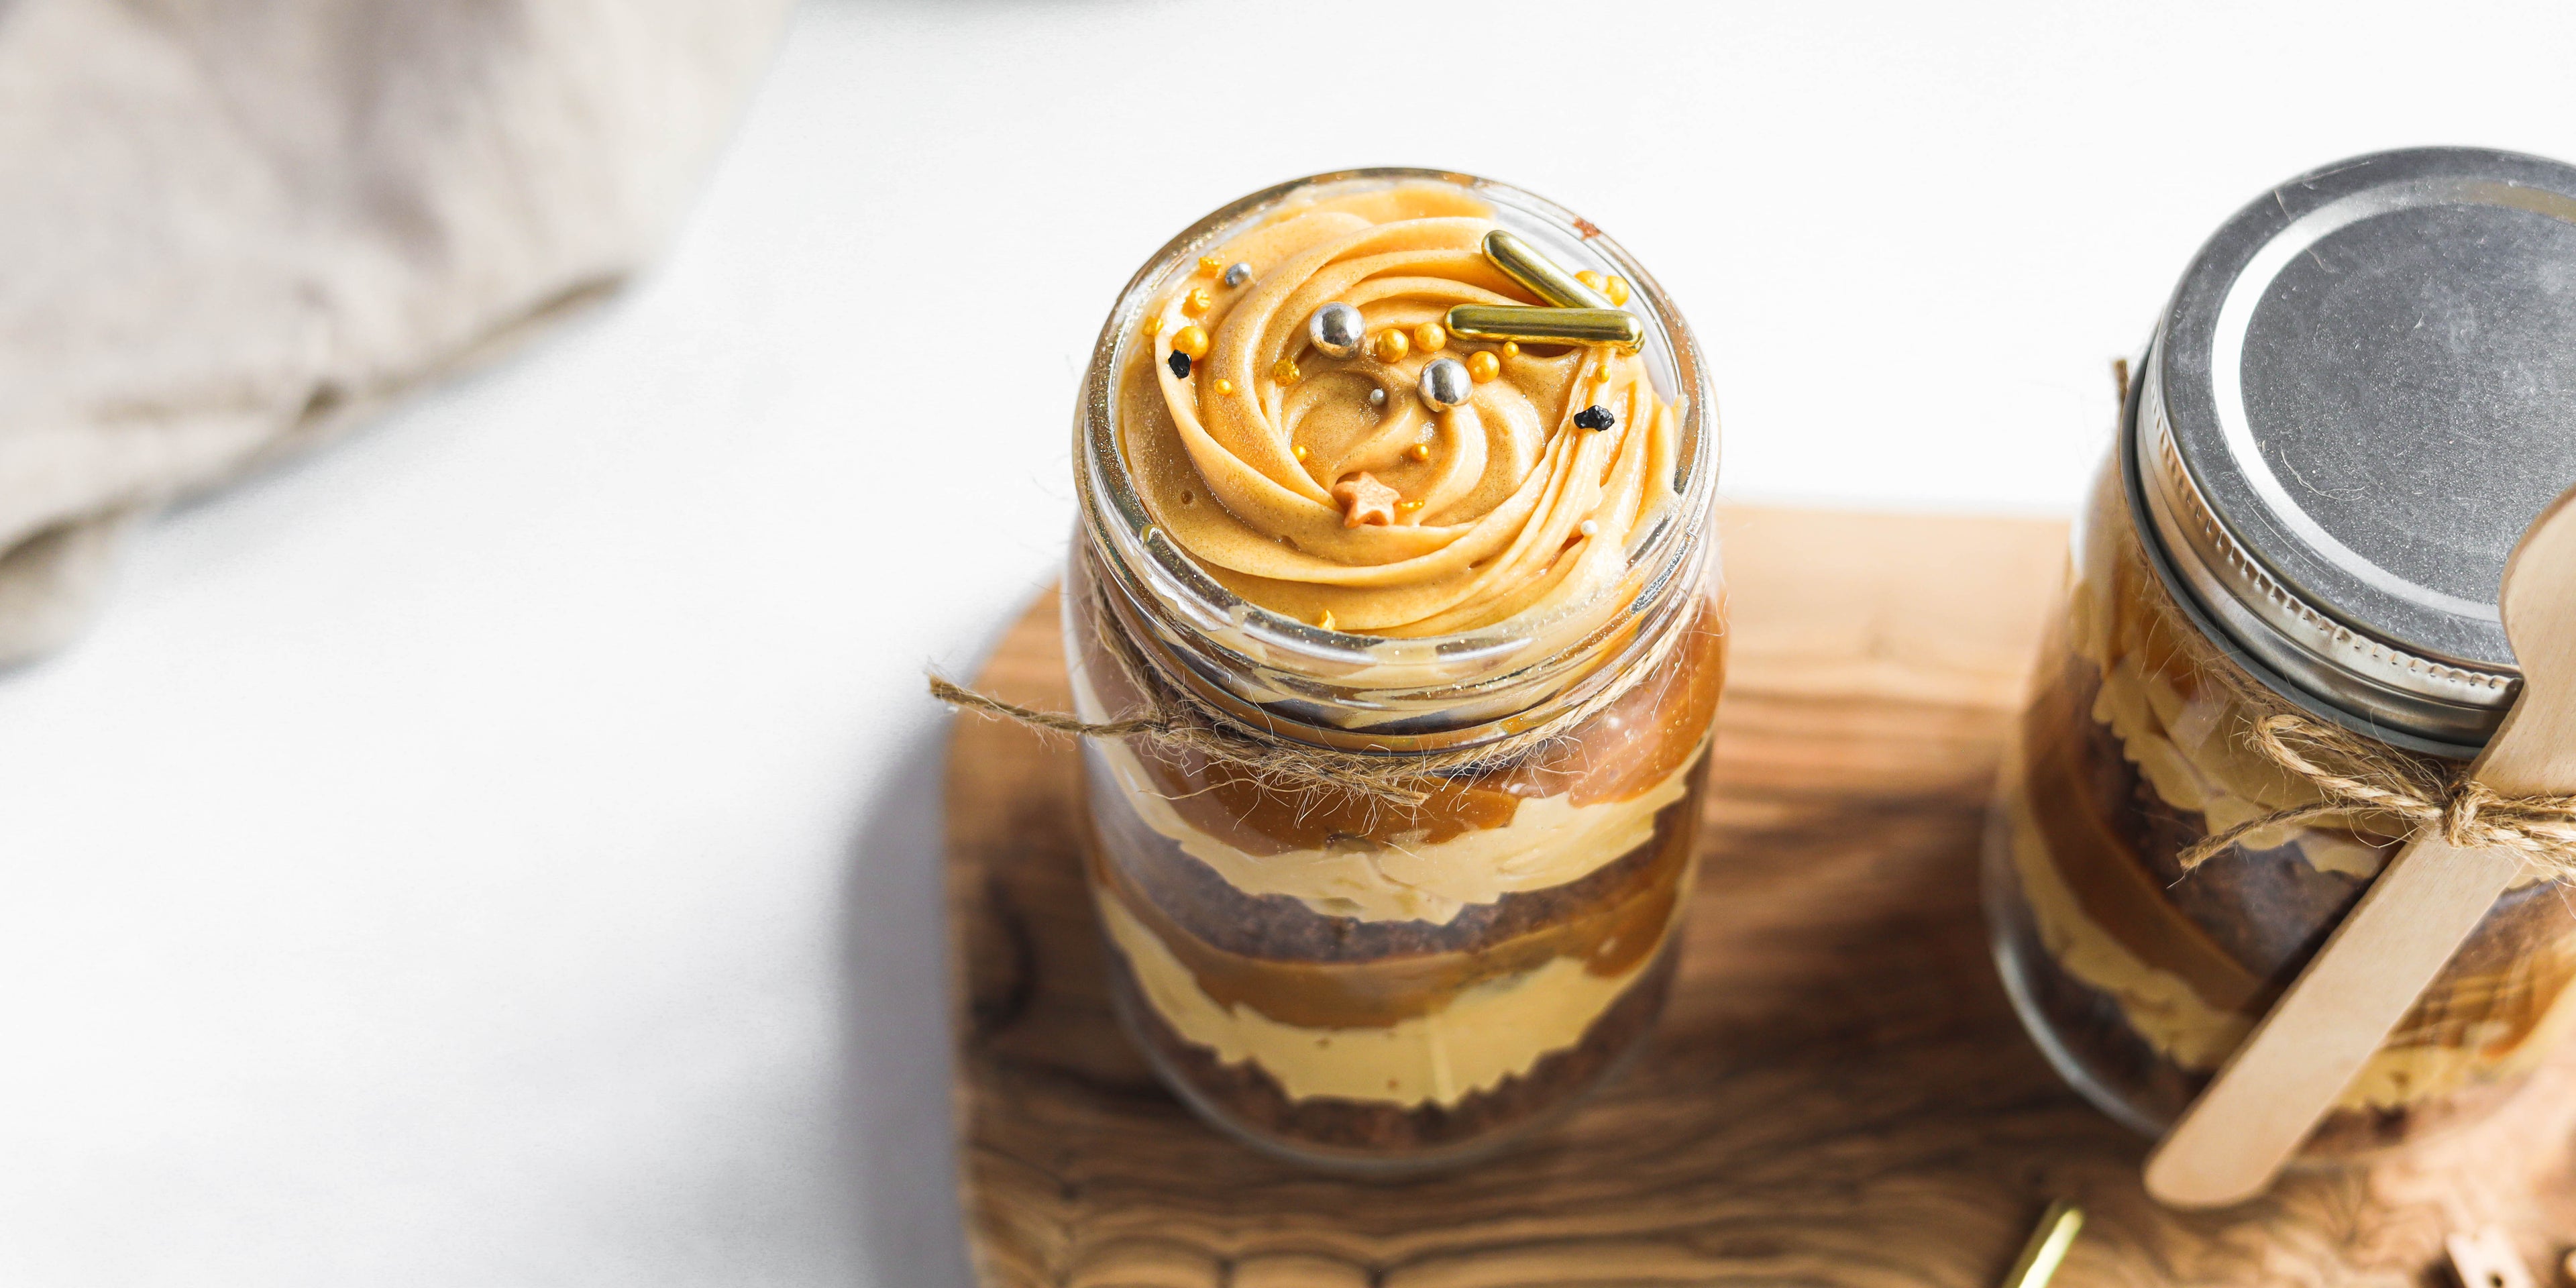 Chocolate & Salted Caramel Cupcakes in a Jar with swirl of buttercream on top, with sprinkles